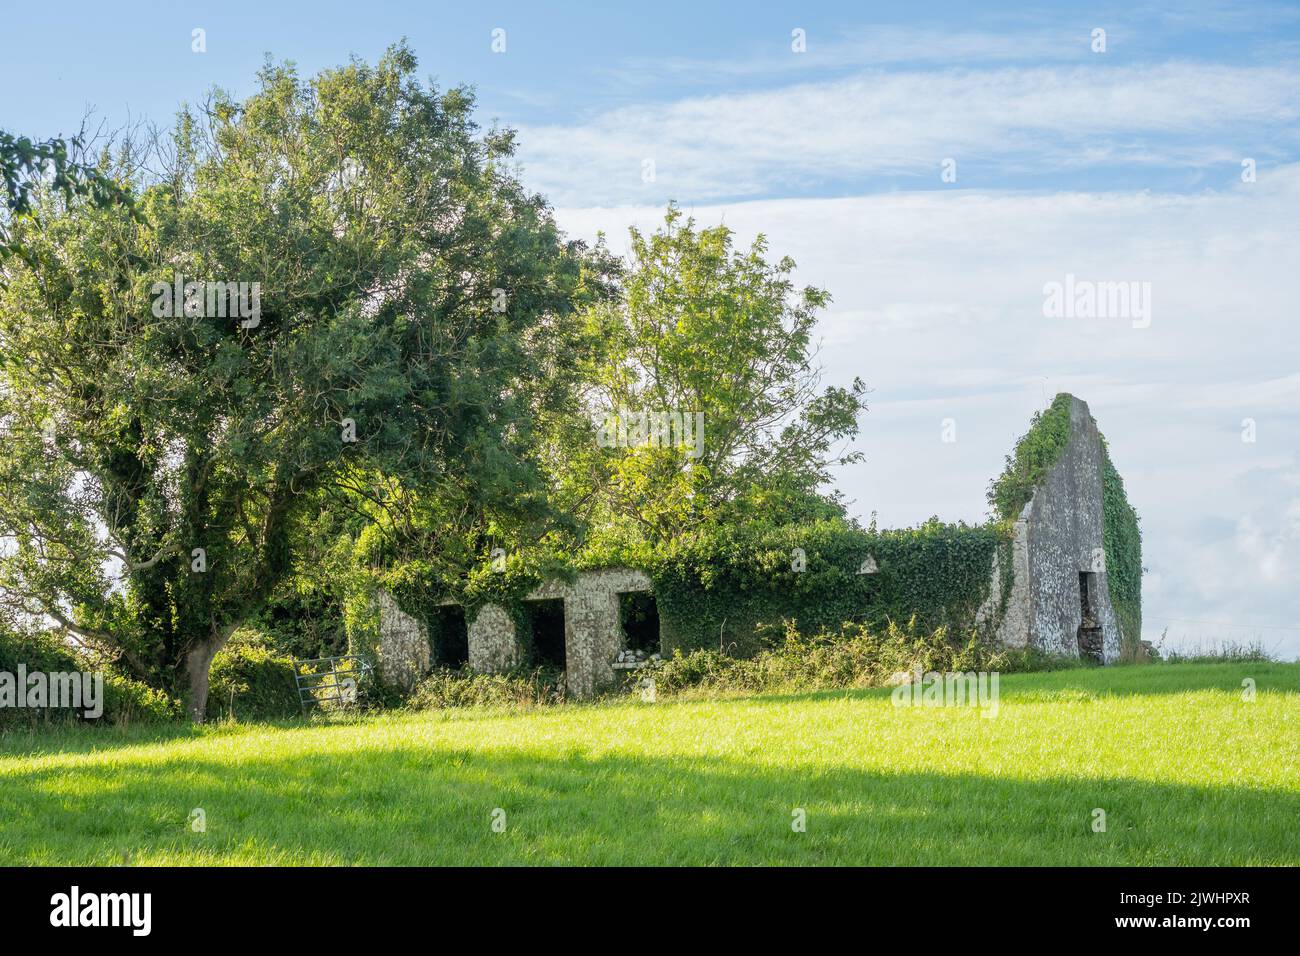 The ruins of an old farmhouse in the Cloughanover district near Headford in County Galway, Ireland. Stock Photo